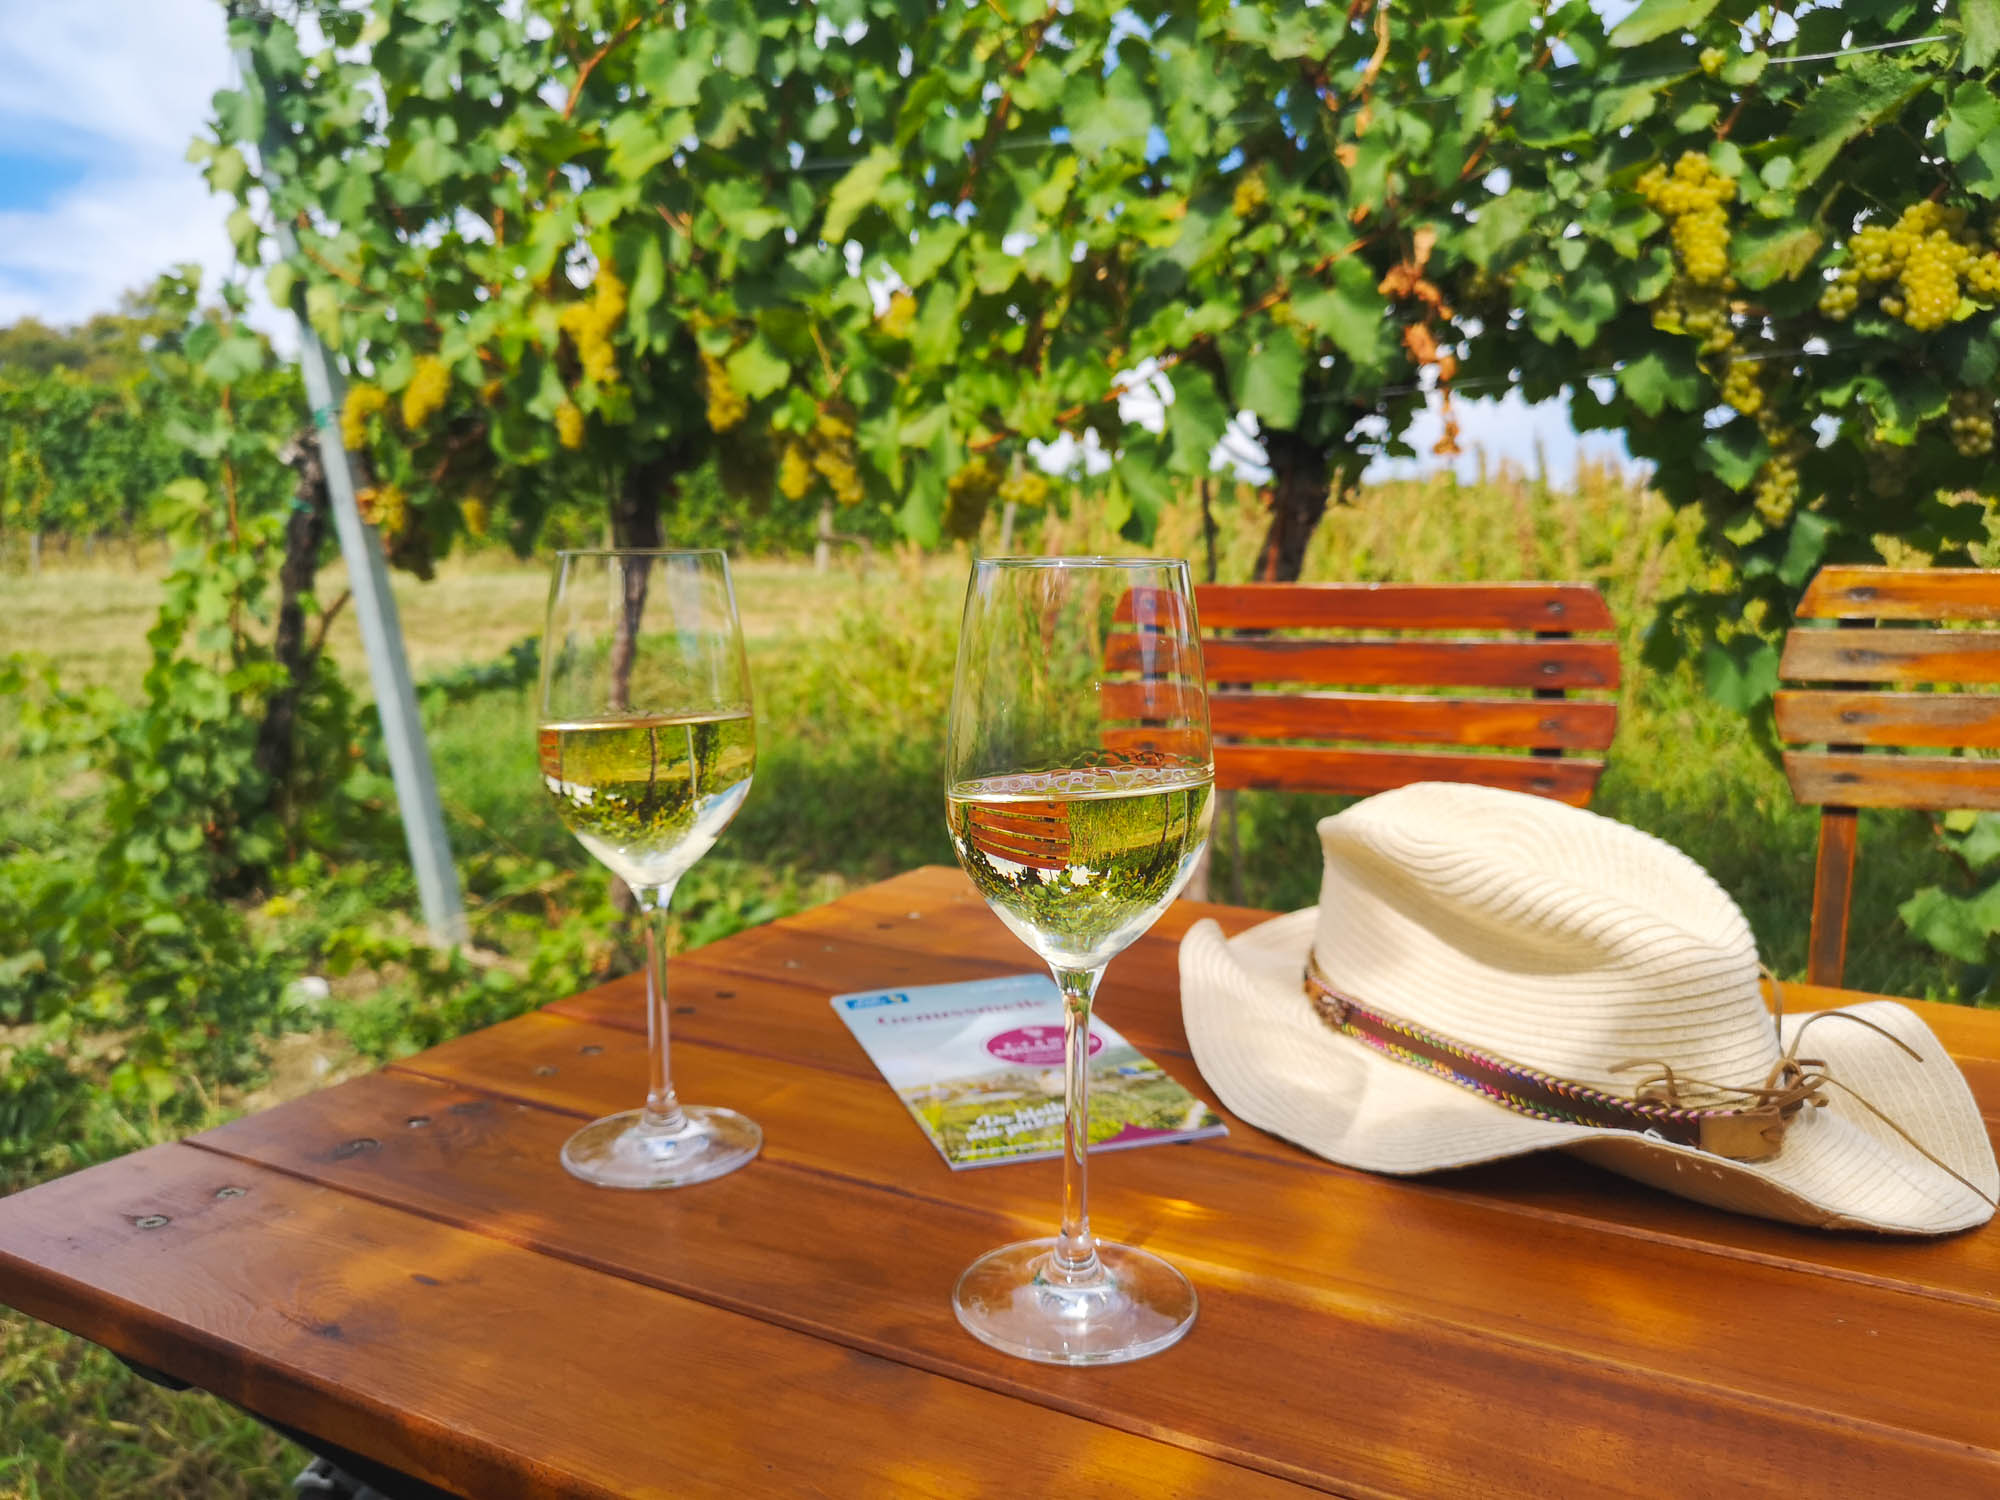 Two glasses of white wine in the vineyards of Thermeregion, Lower Austria